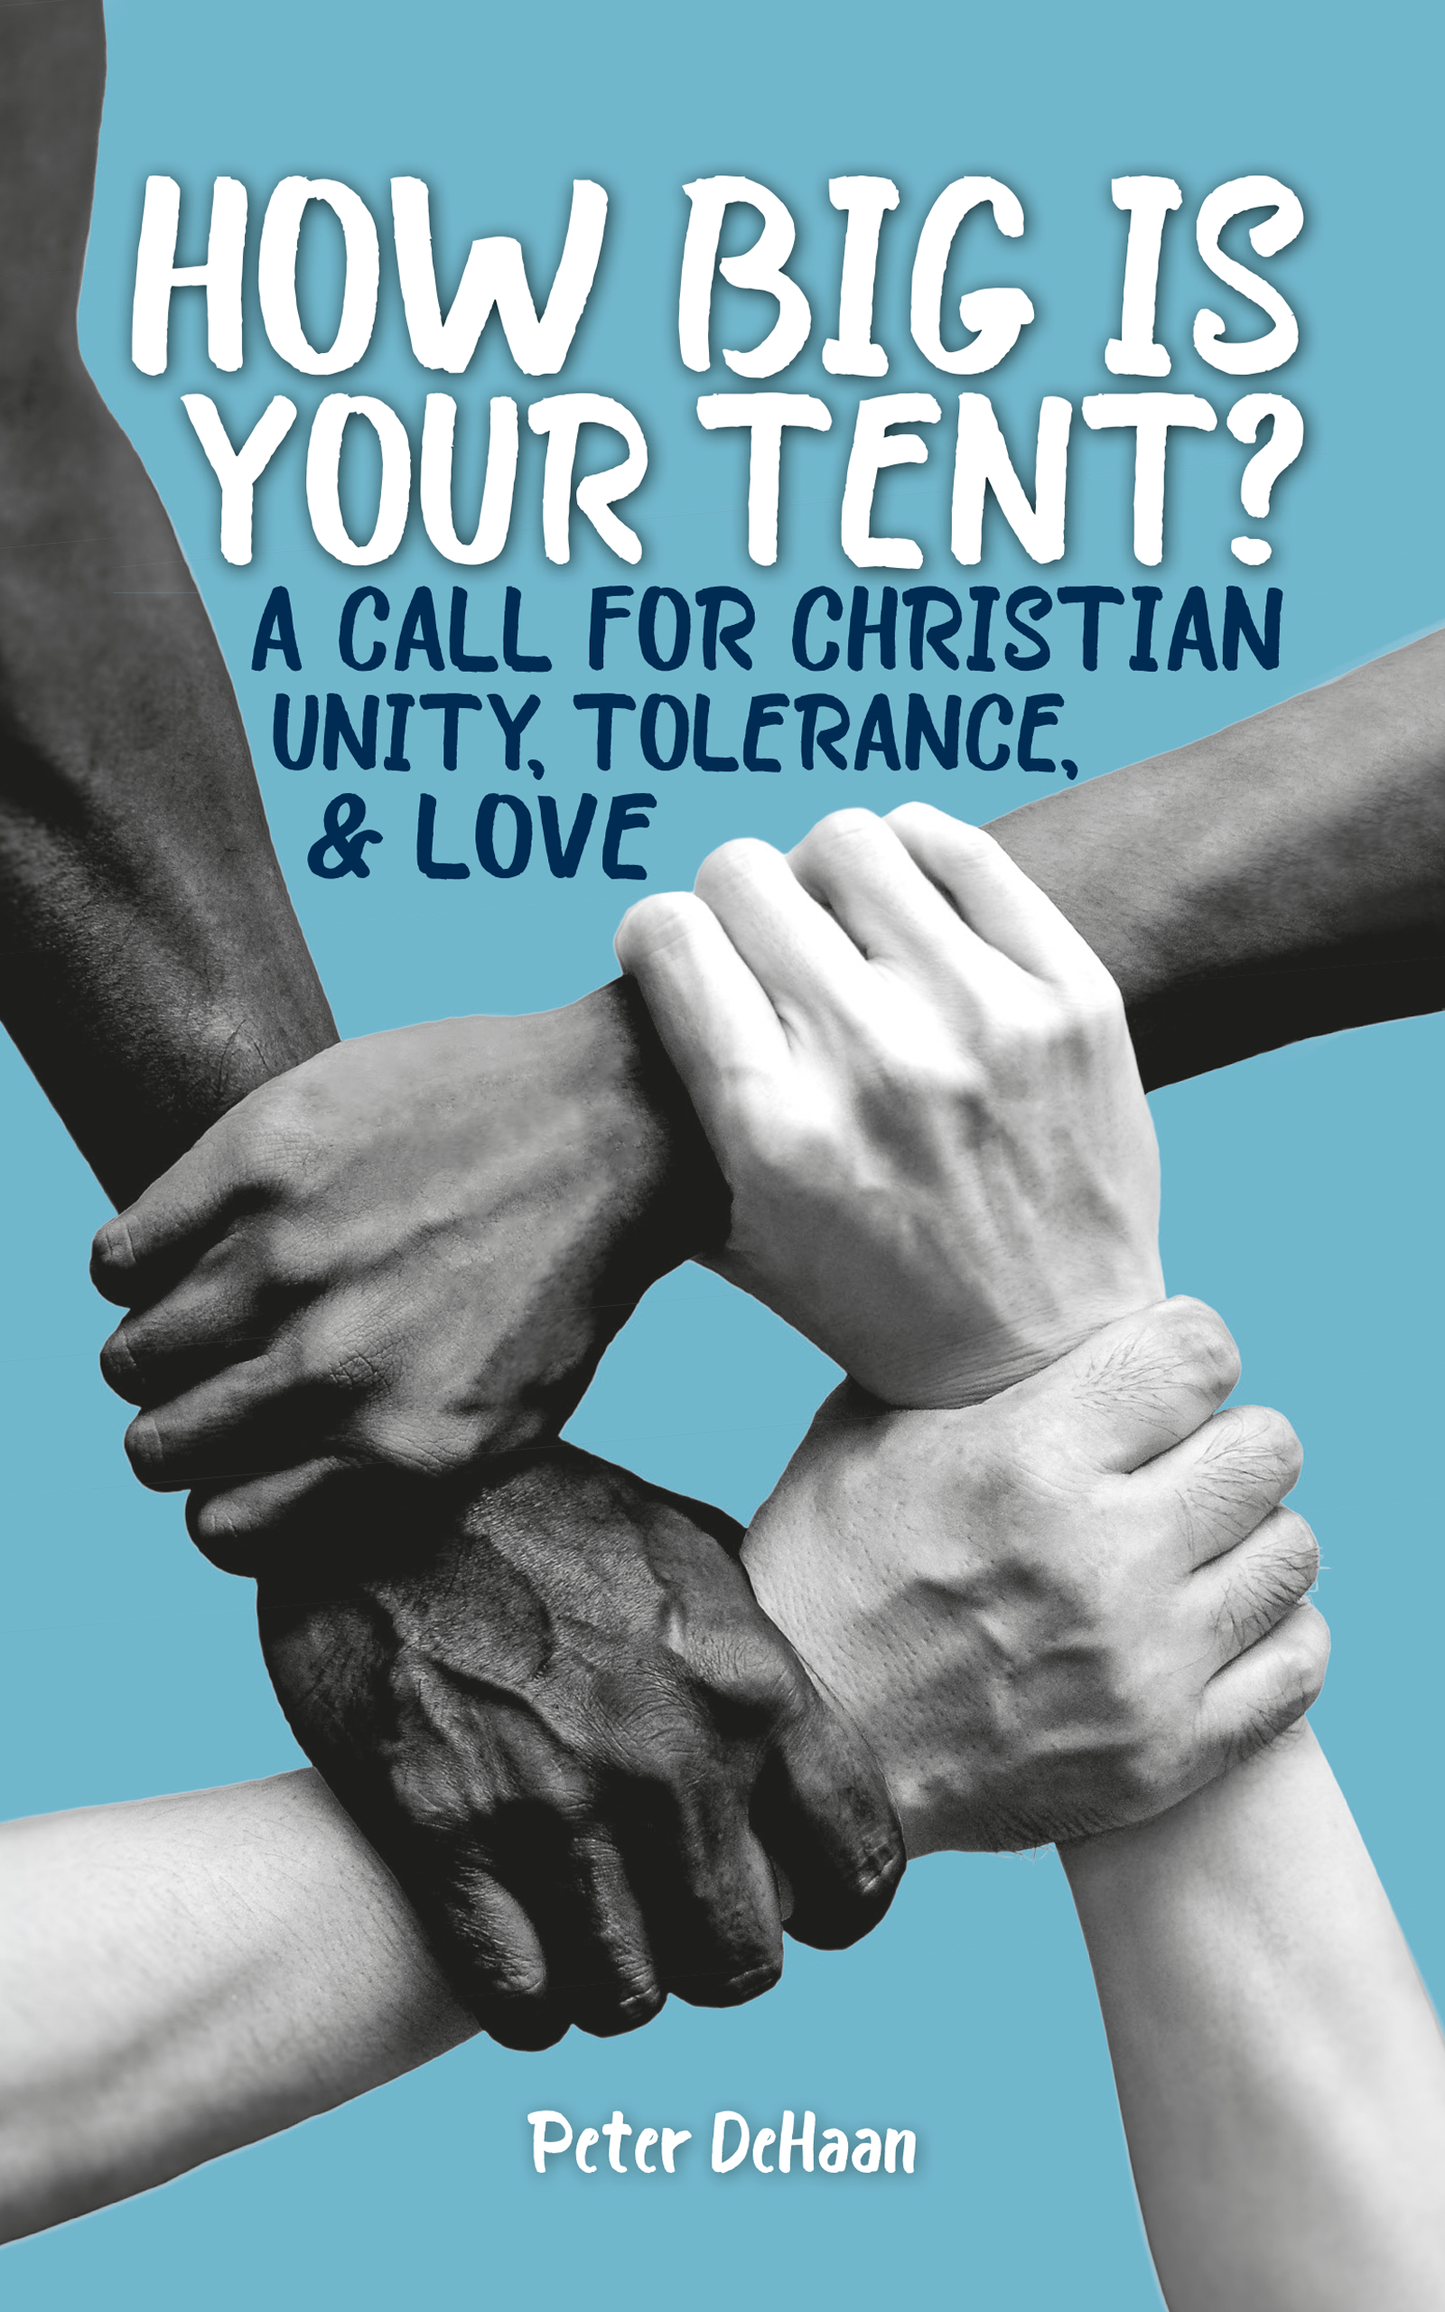 How Big is Your Tent? A Call for Christian Unity, Tolerance, and Love (ebook)